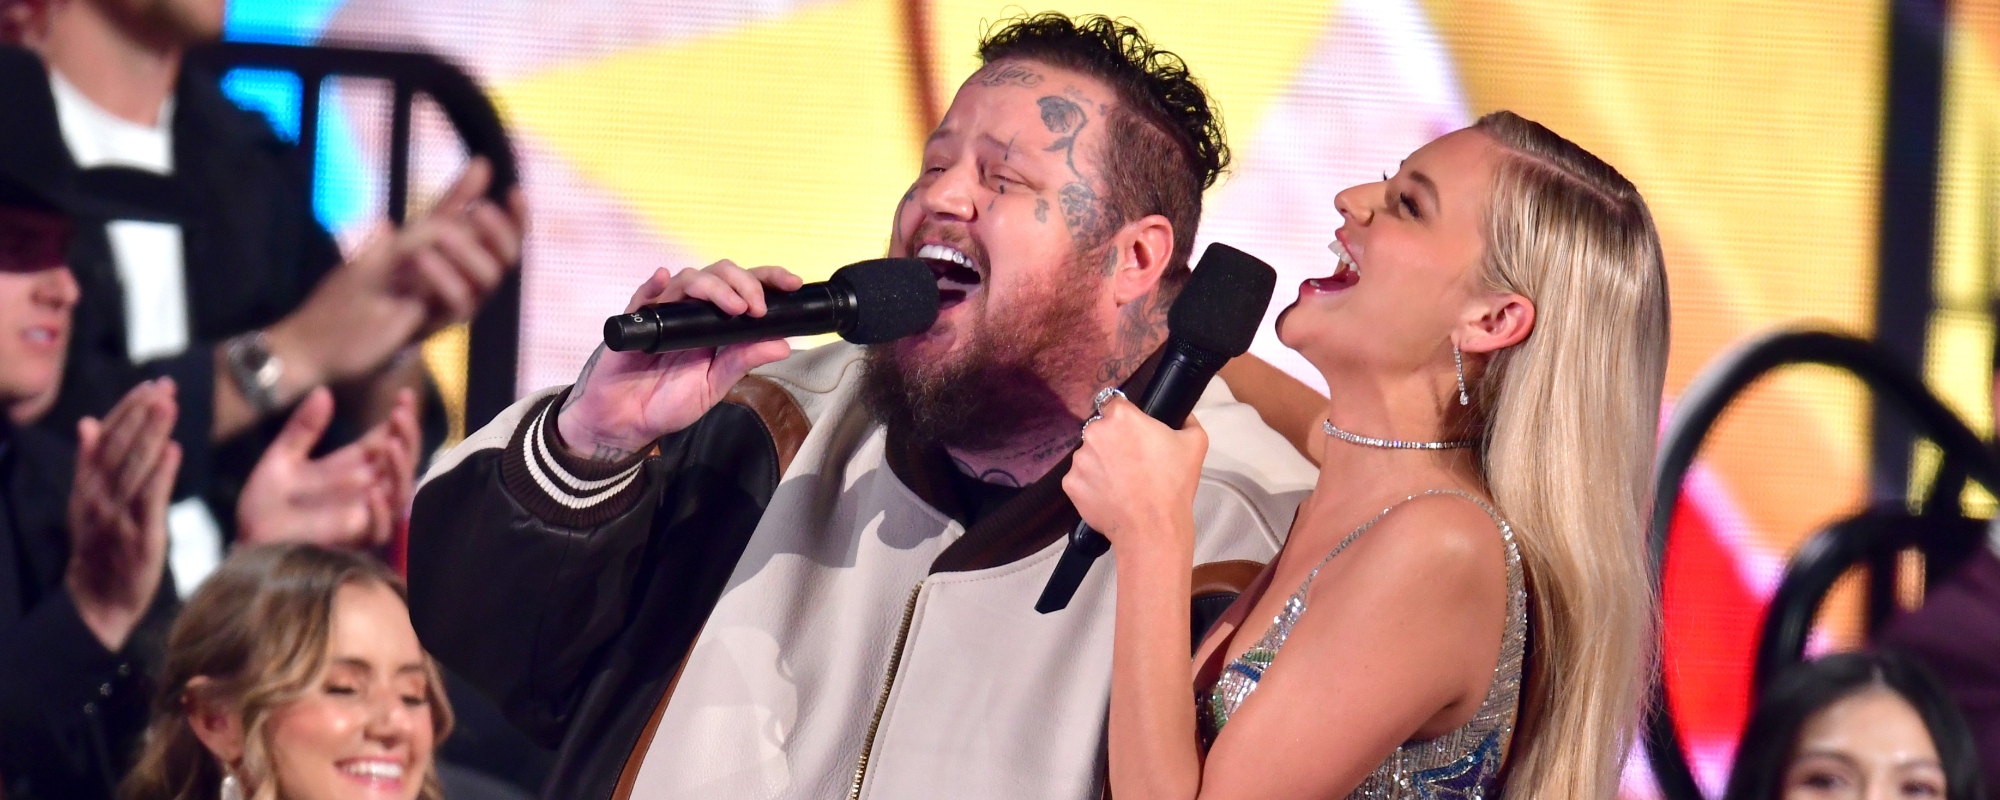 Jelly Roll Thanks Fans, Sheds Tears, & Plans to Party the Night Away After Epic CMT Music Awards Win